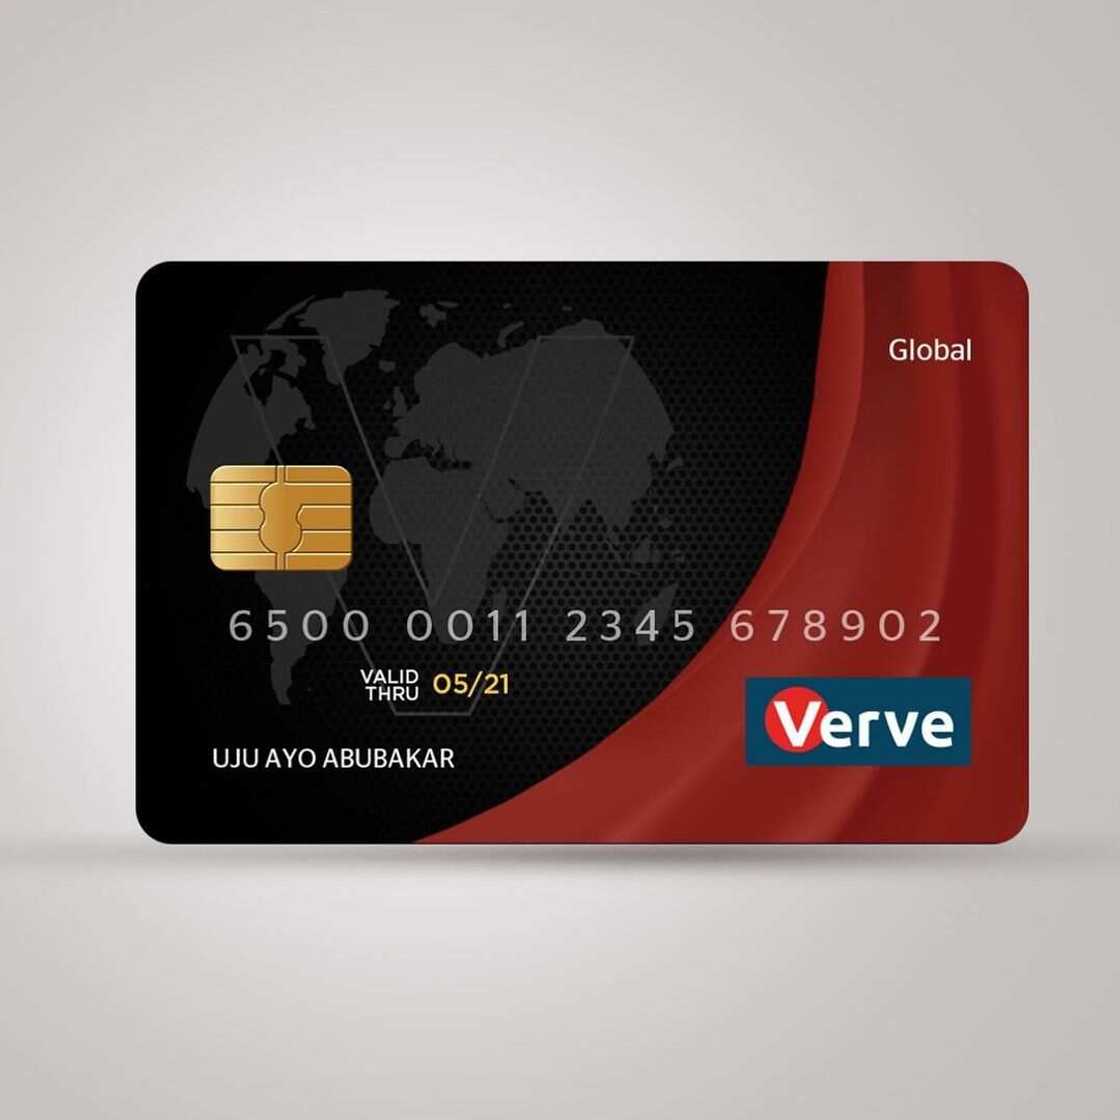 can a Verve card be used for international online payment